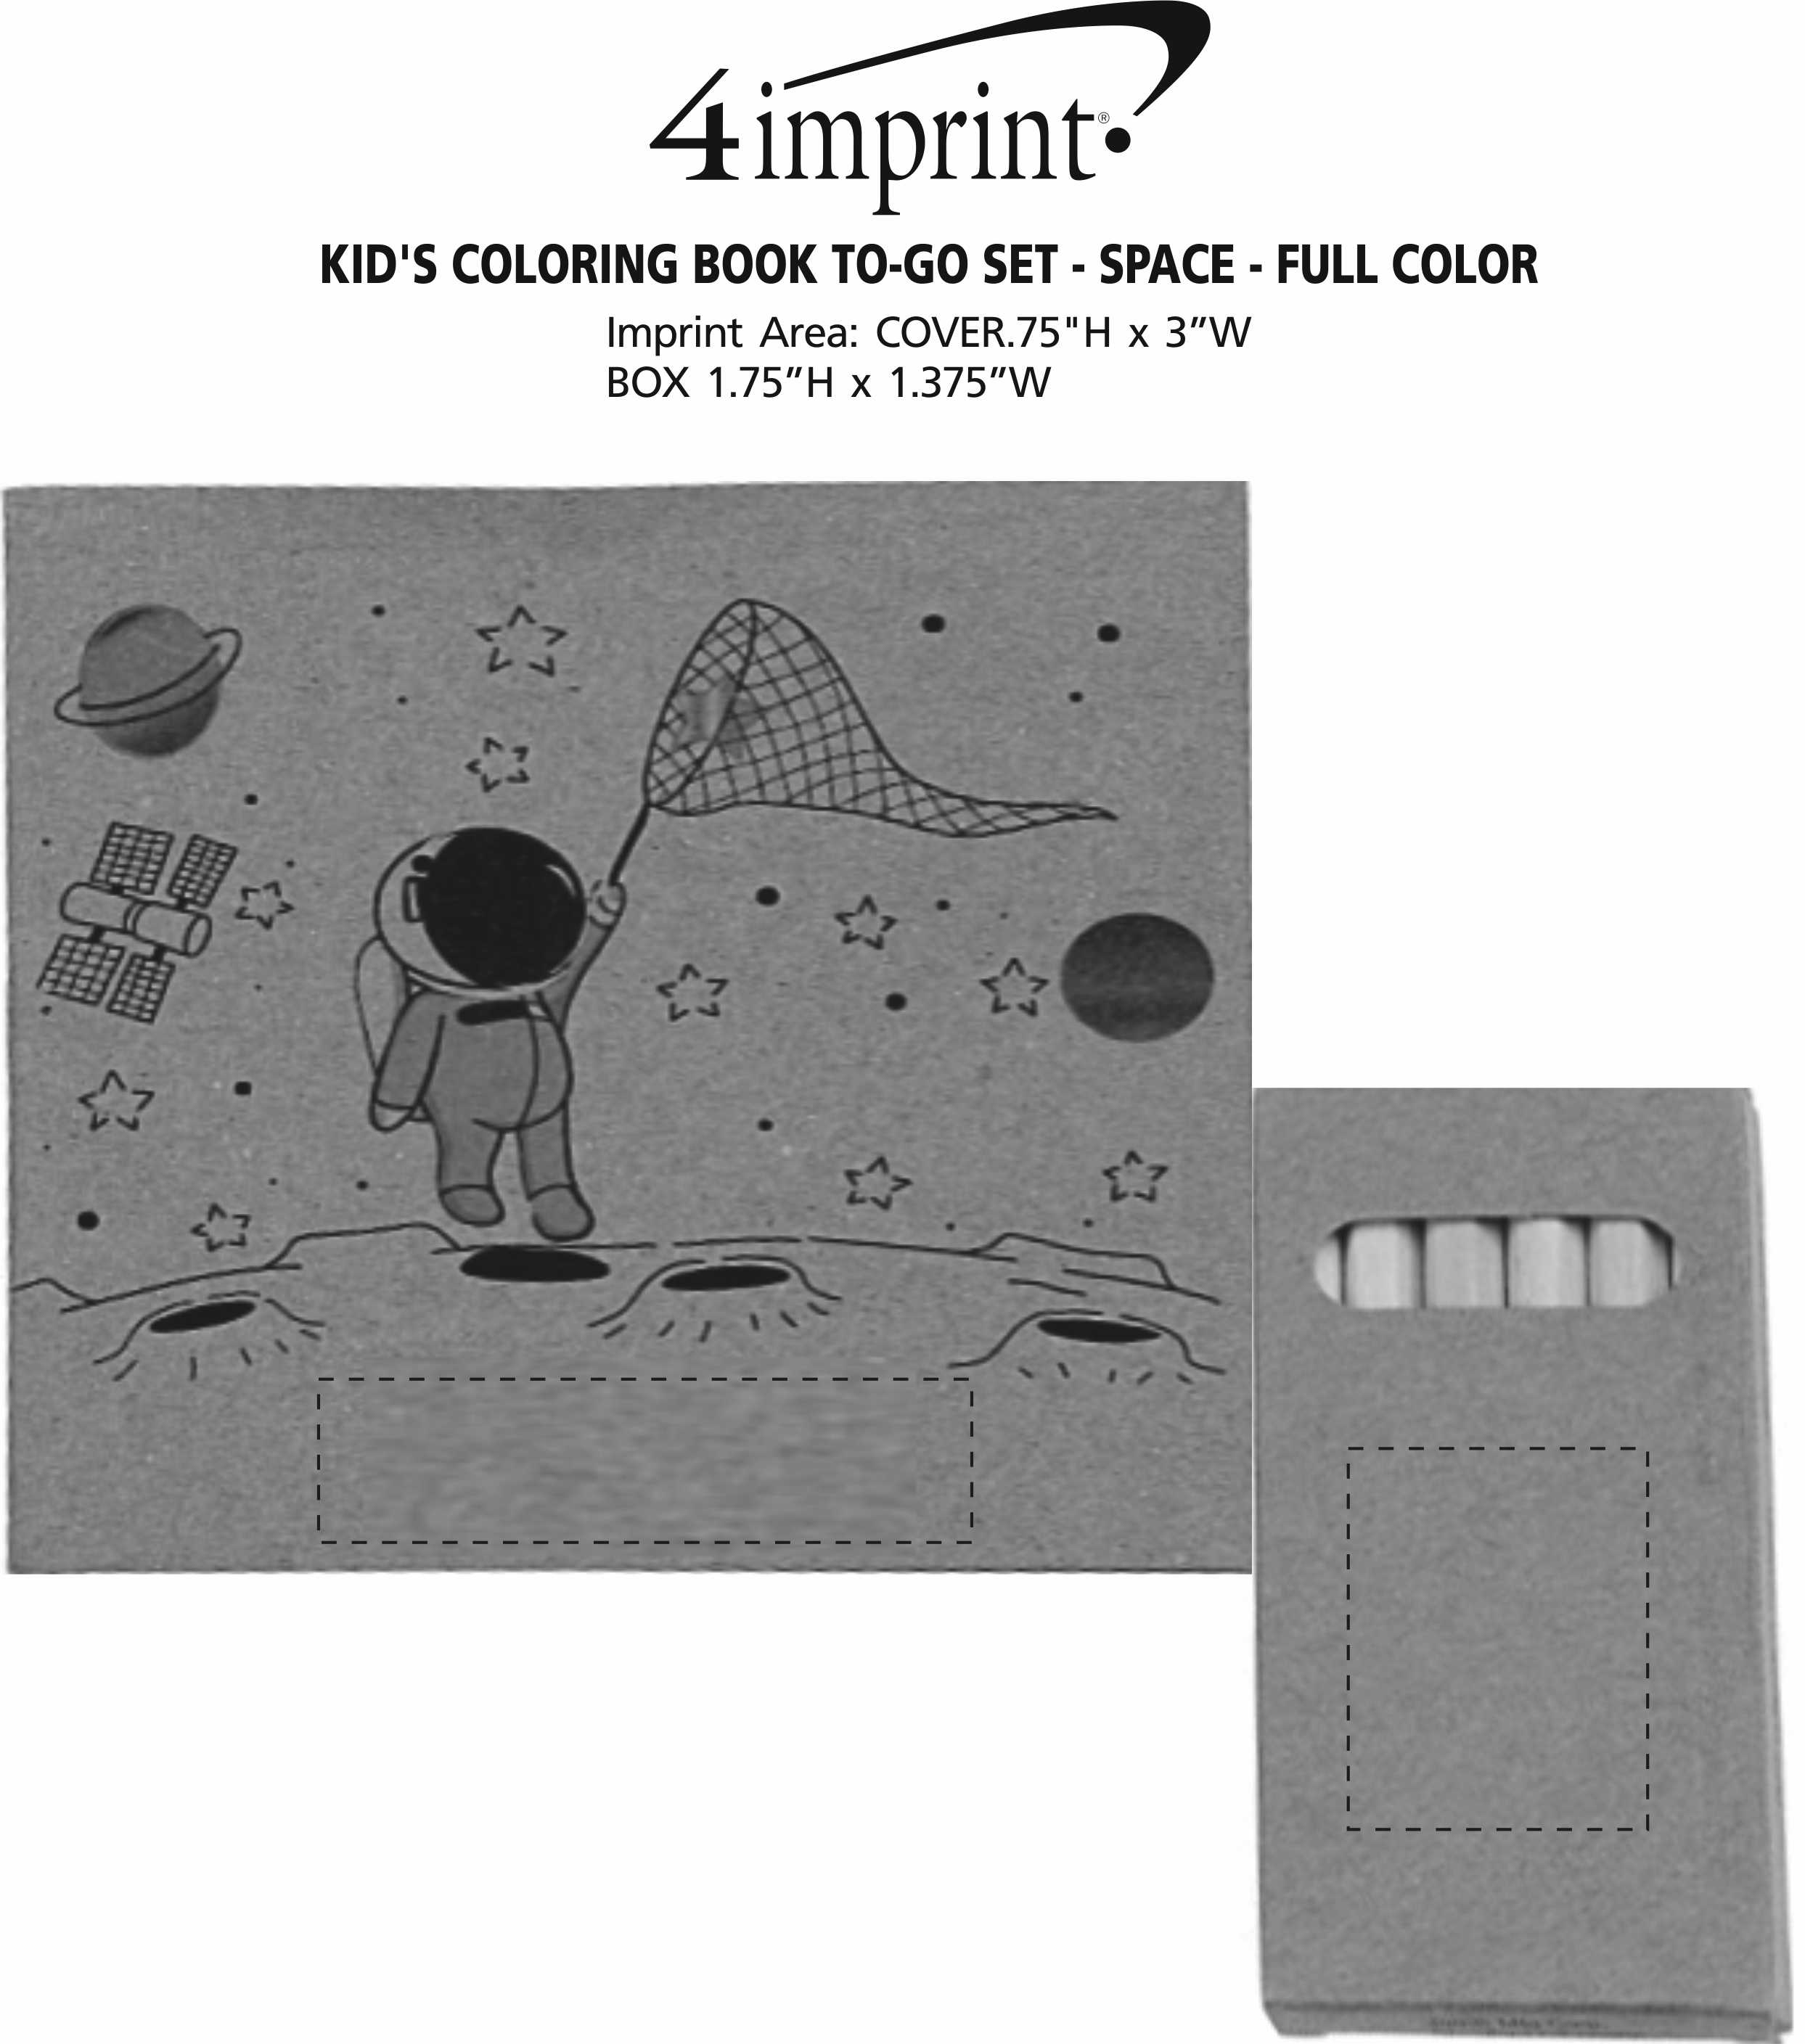 Imprint Area of Kid's Coloring Book To-Go Set - Space - Full Color